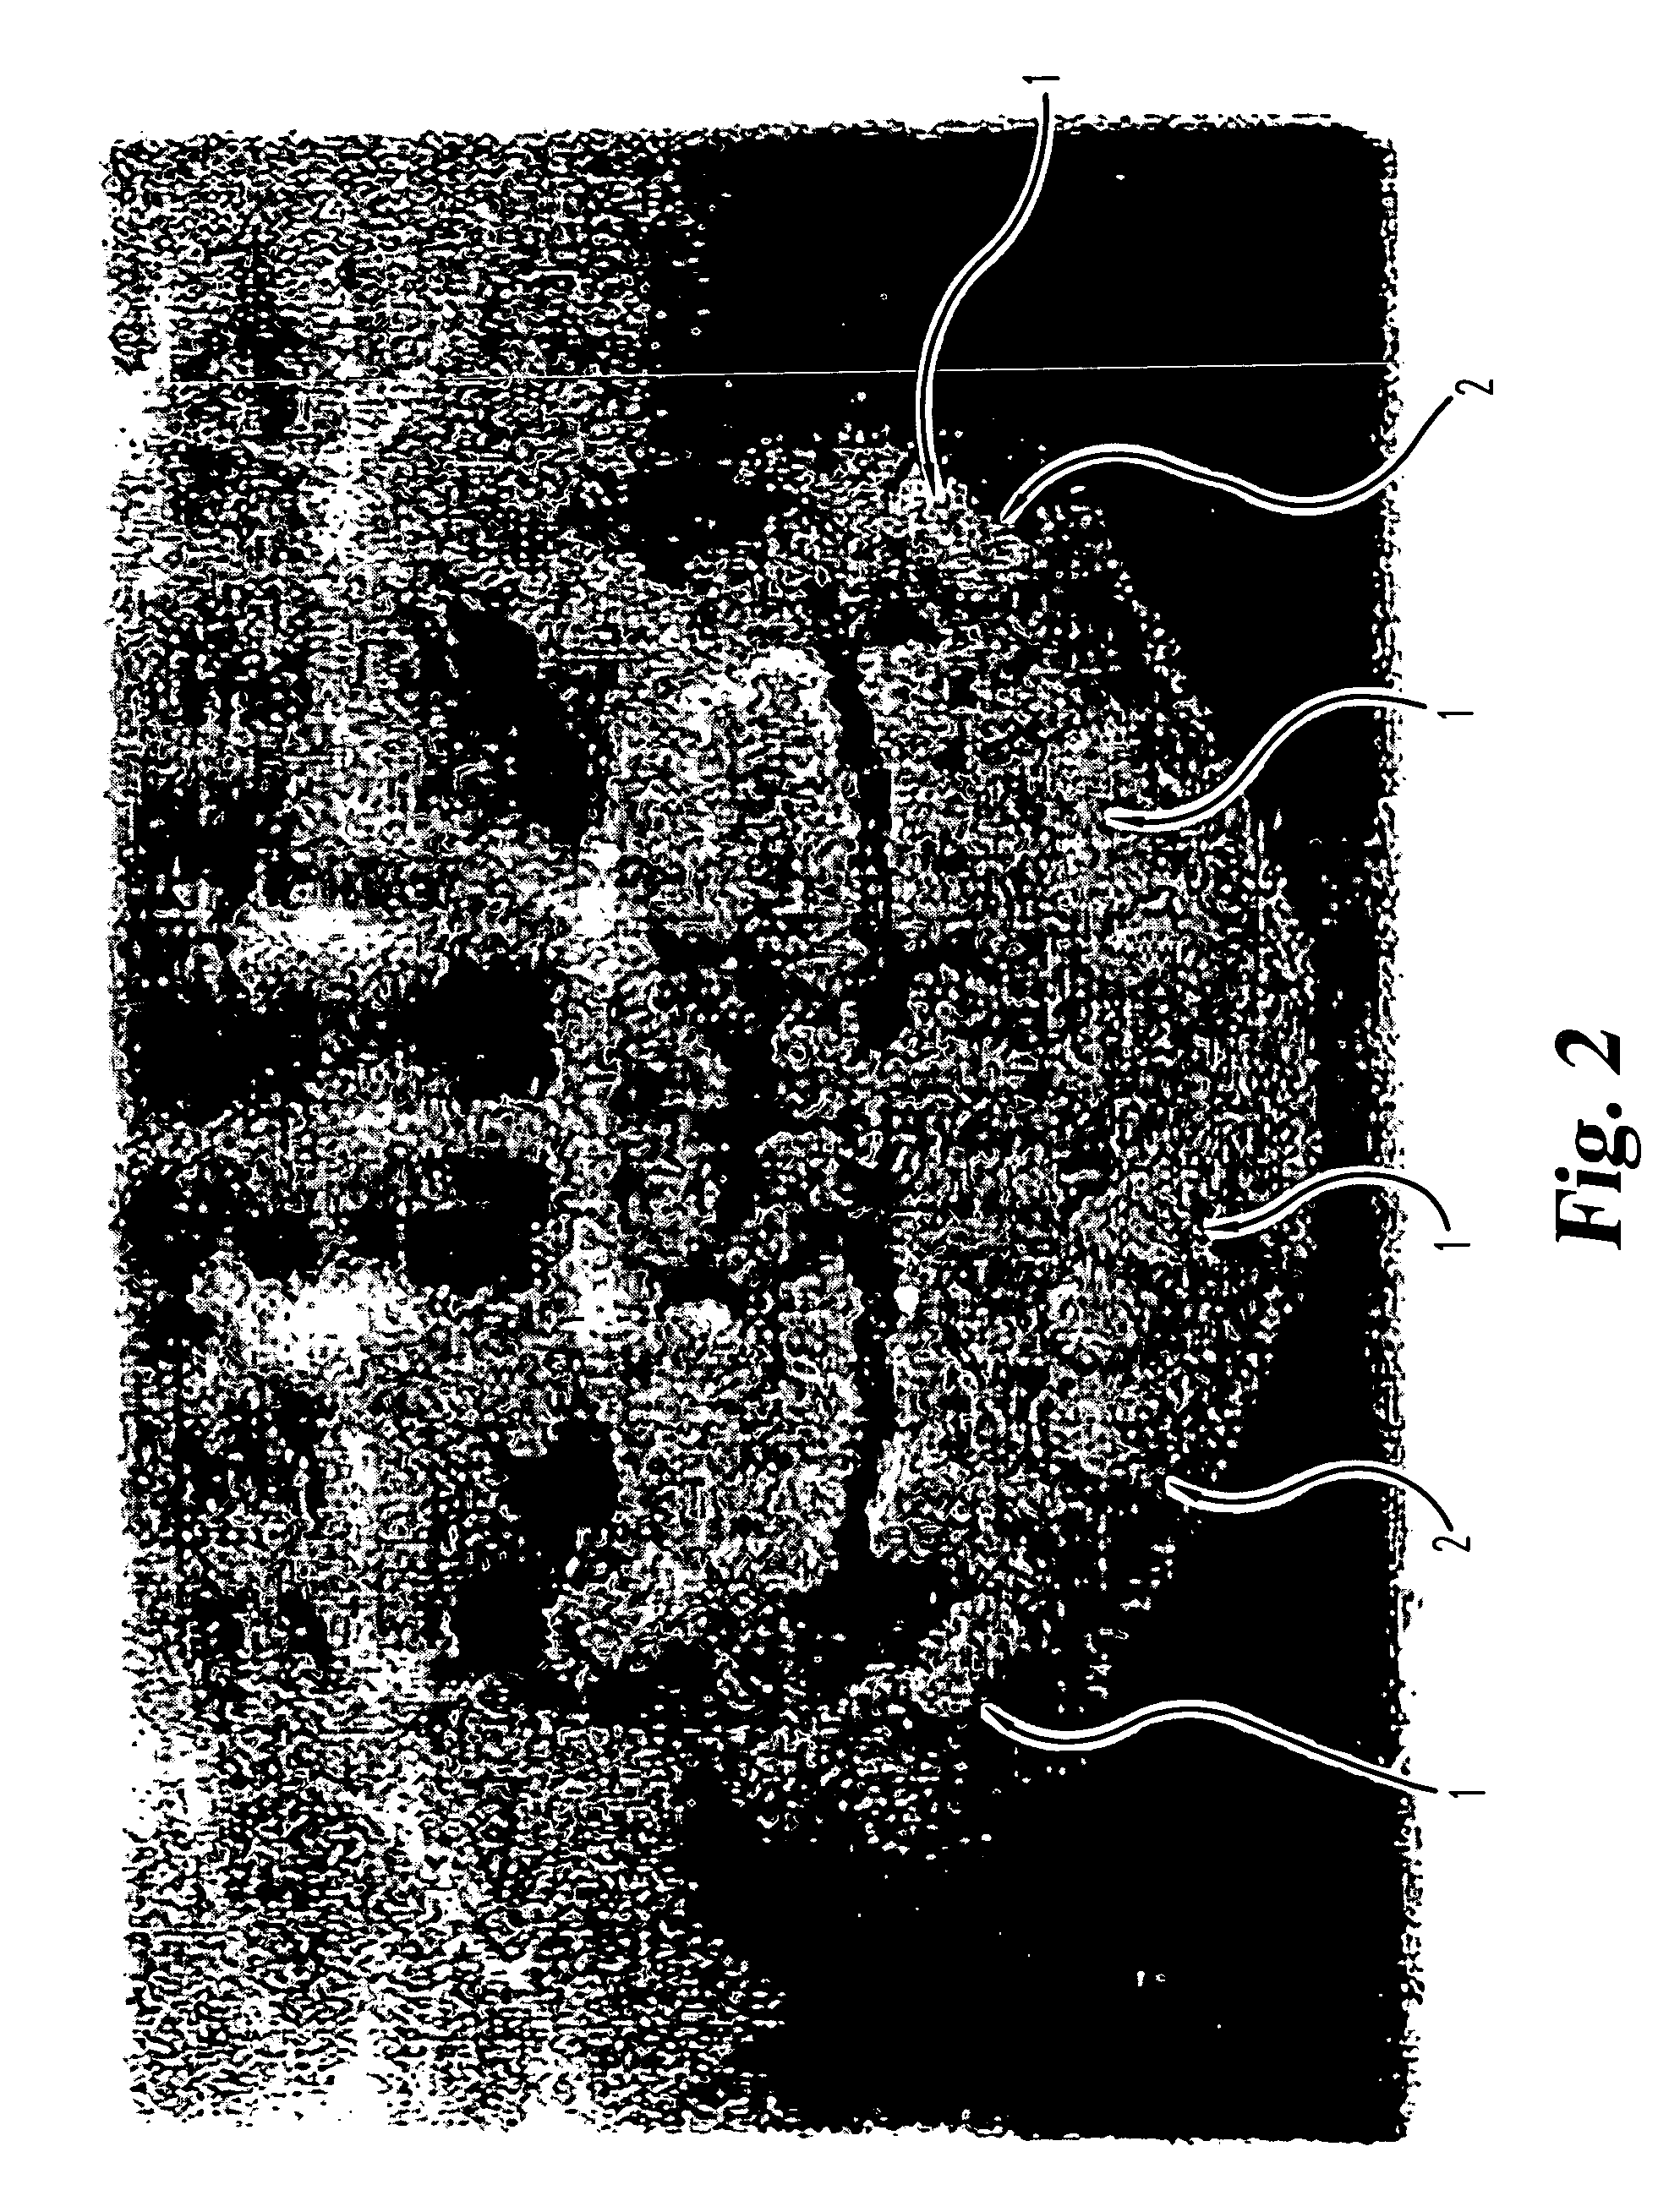 Method for obtaining and storing multipotent stem cells